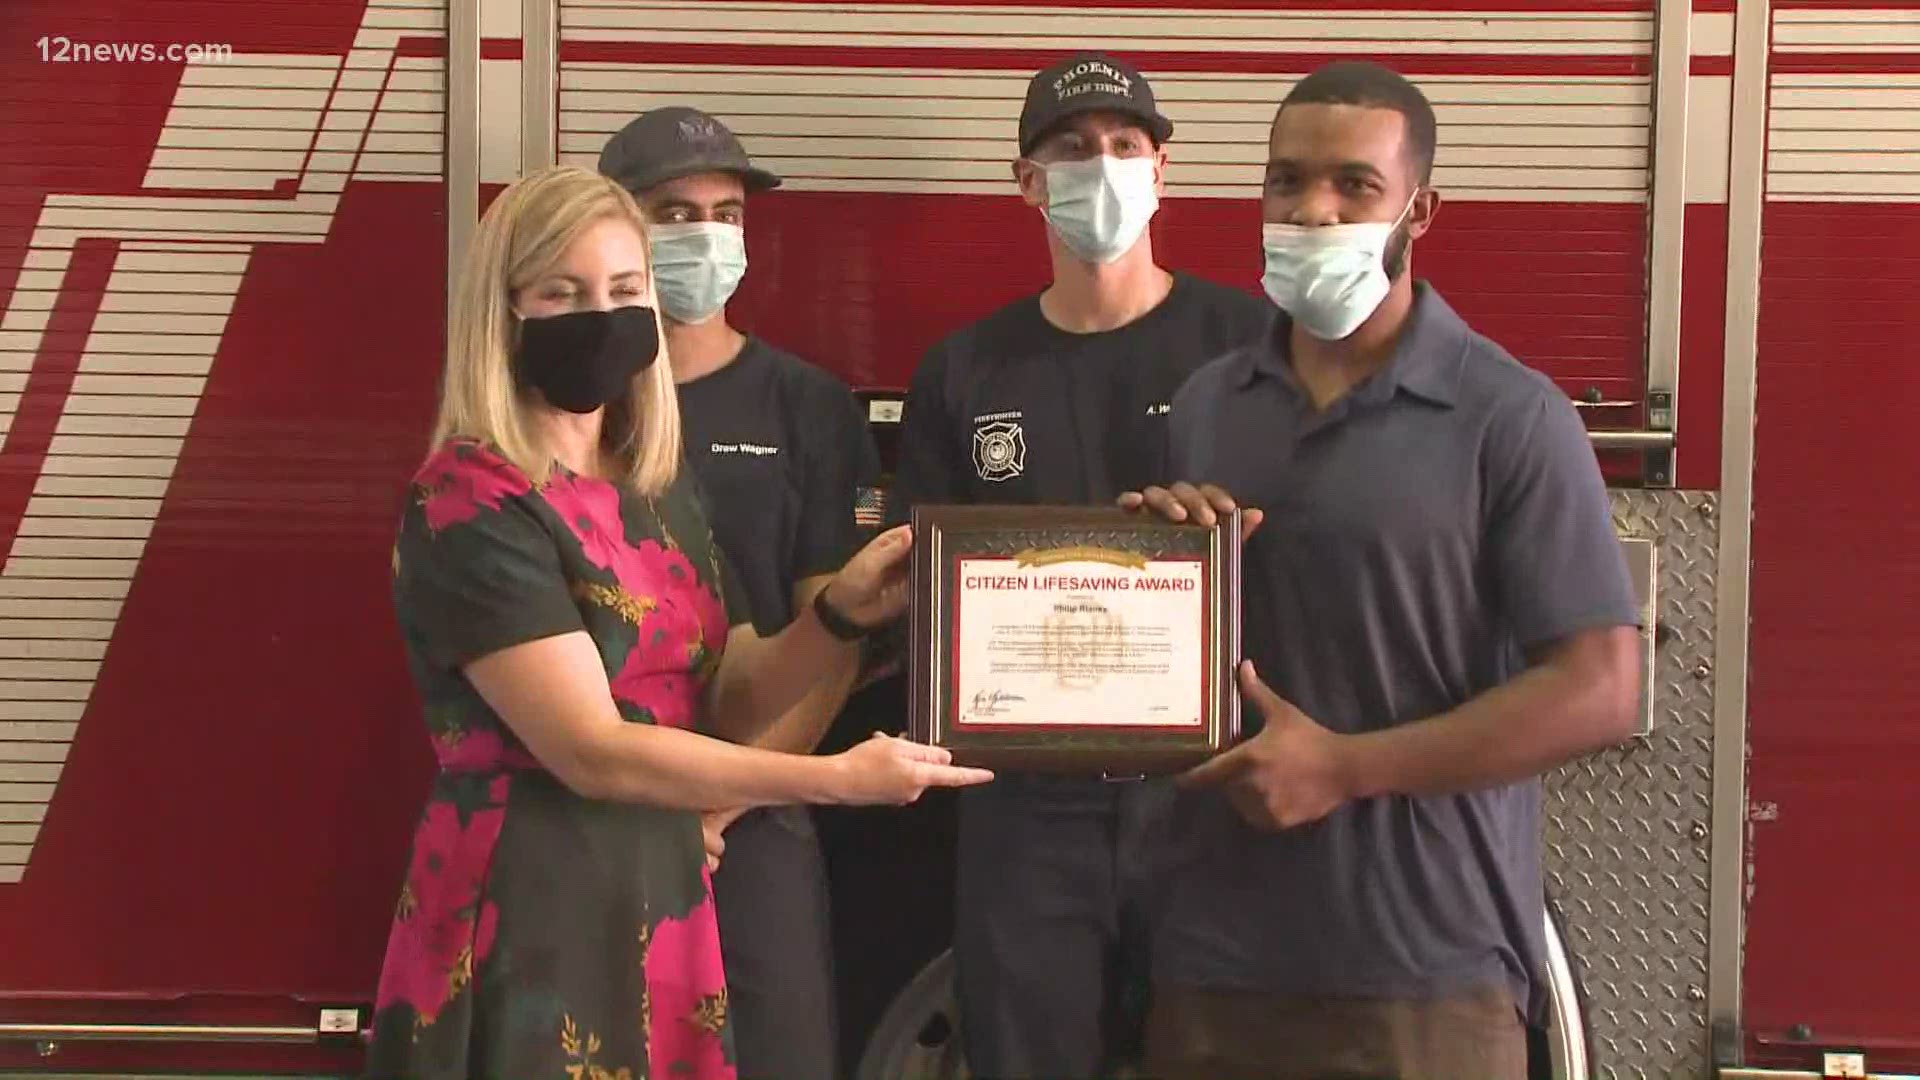 Phillip Blanks was honored for his heroic efforts to save a 3-year-old. Blanks caught the child after his mom dropped him from a burning third-floor apartment.